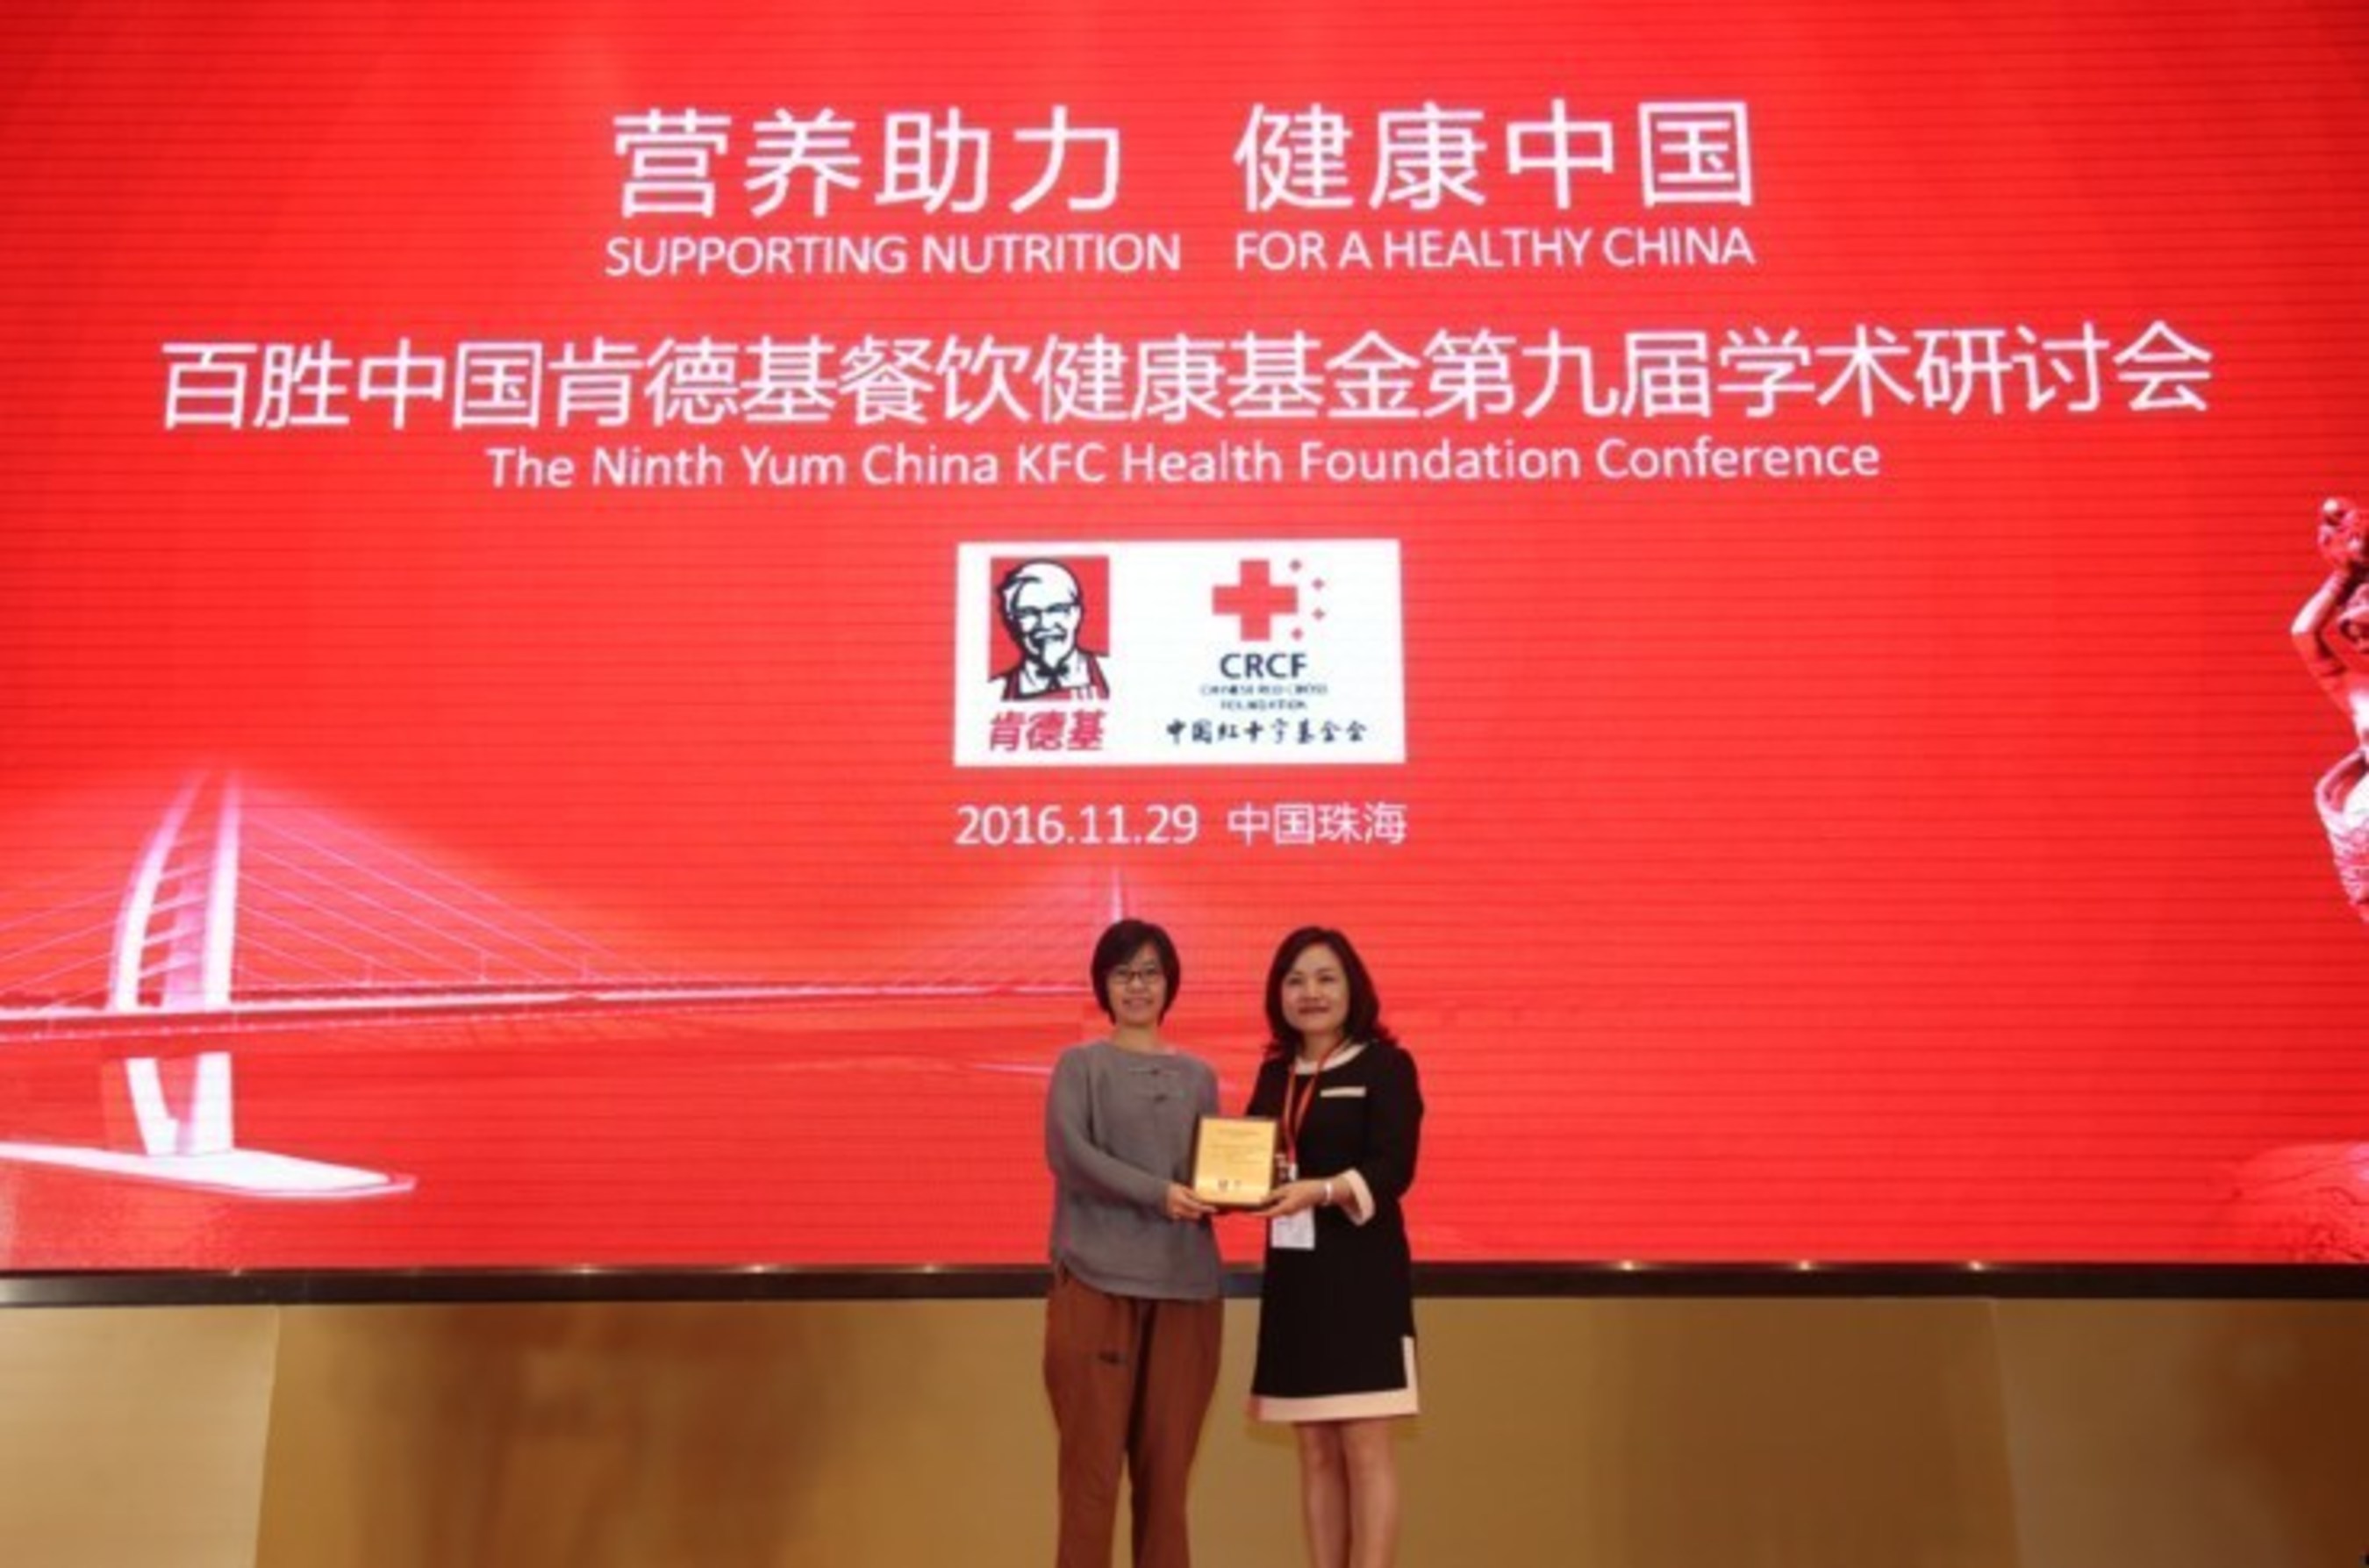 Alice Wang, Public Affairs VP of Yum China, announcing research projects sponsored by Yum China KFC Health Foundation. Since 2007, the Foundation has provided RMB 15 million to support over 50 science research and education programs to improve the eating habits of Chinese people.